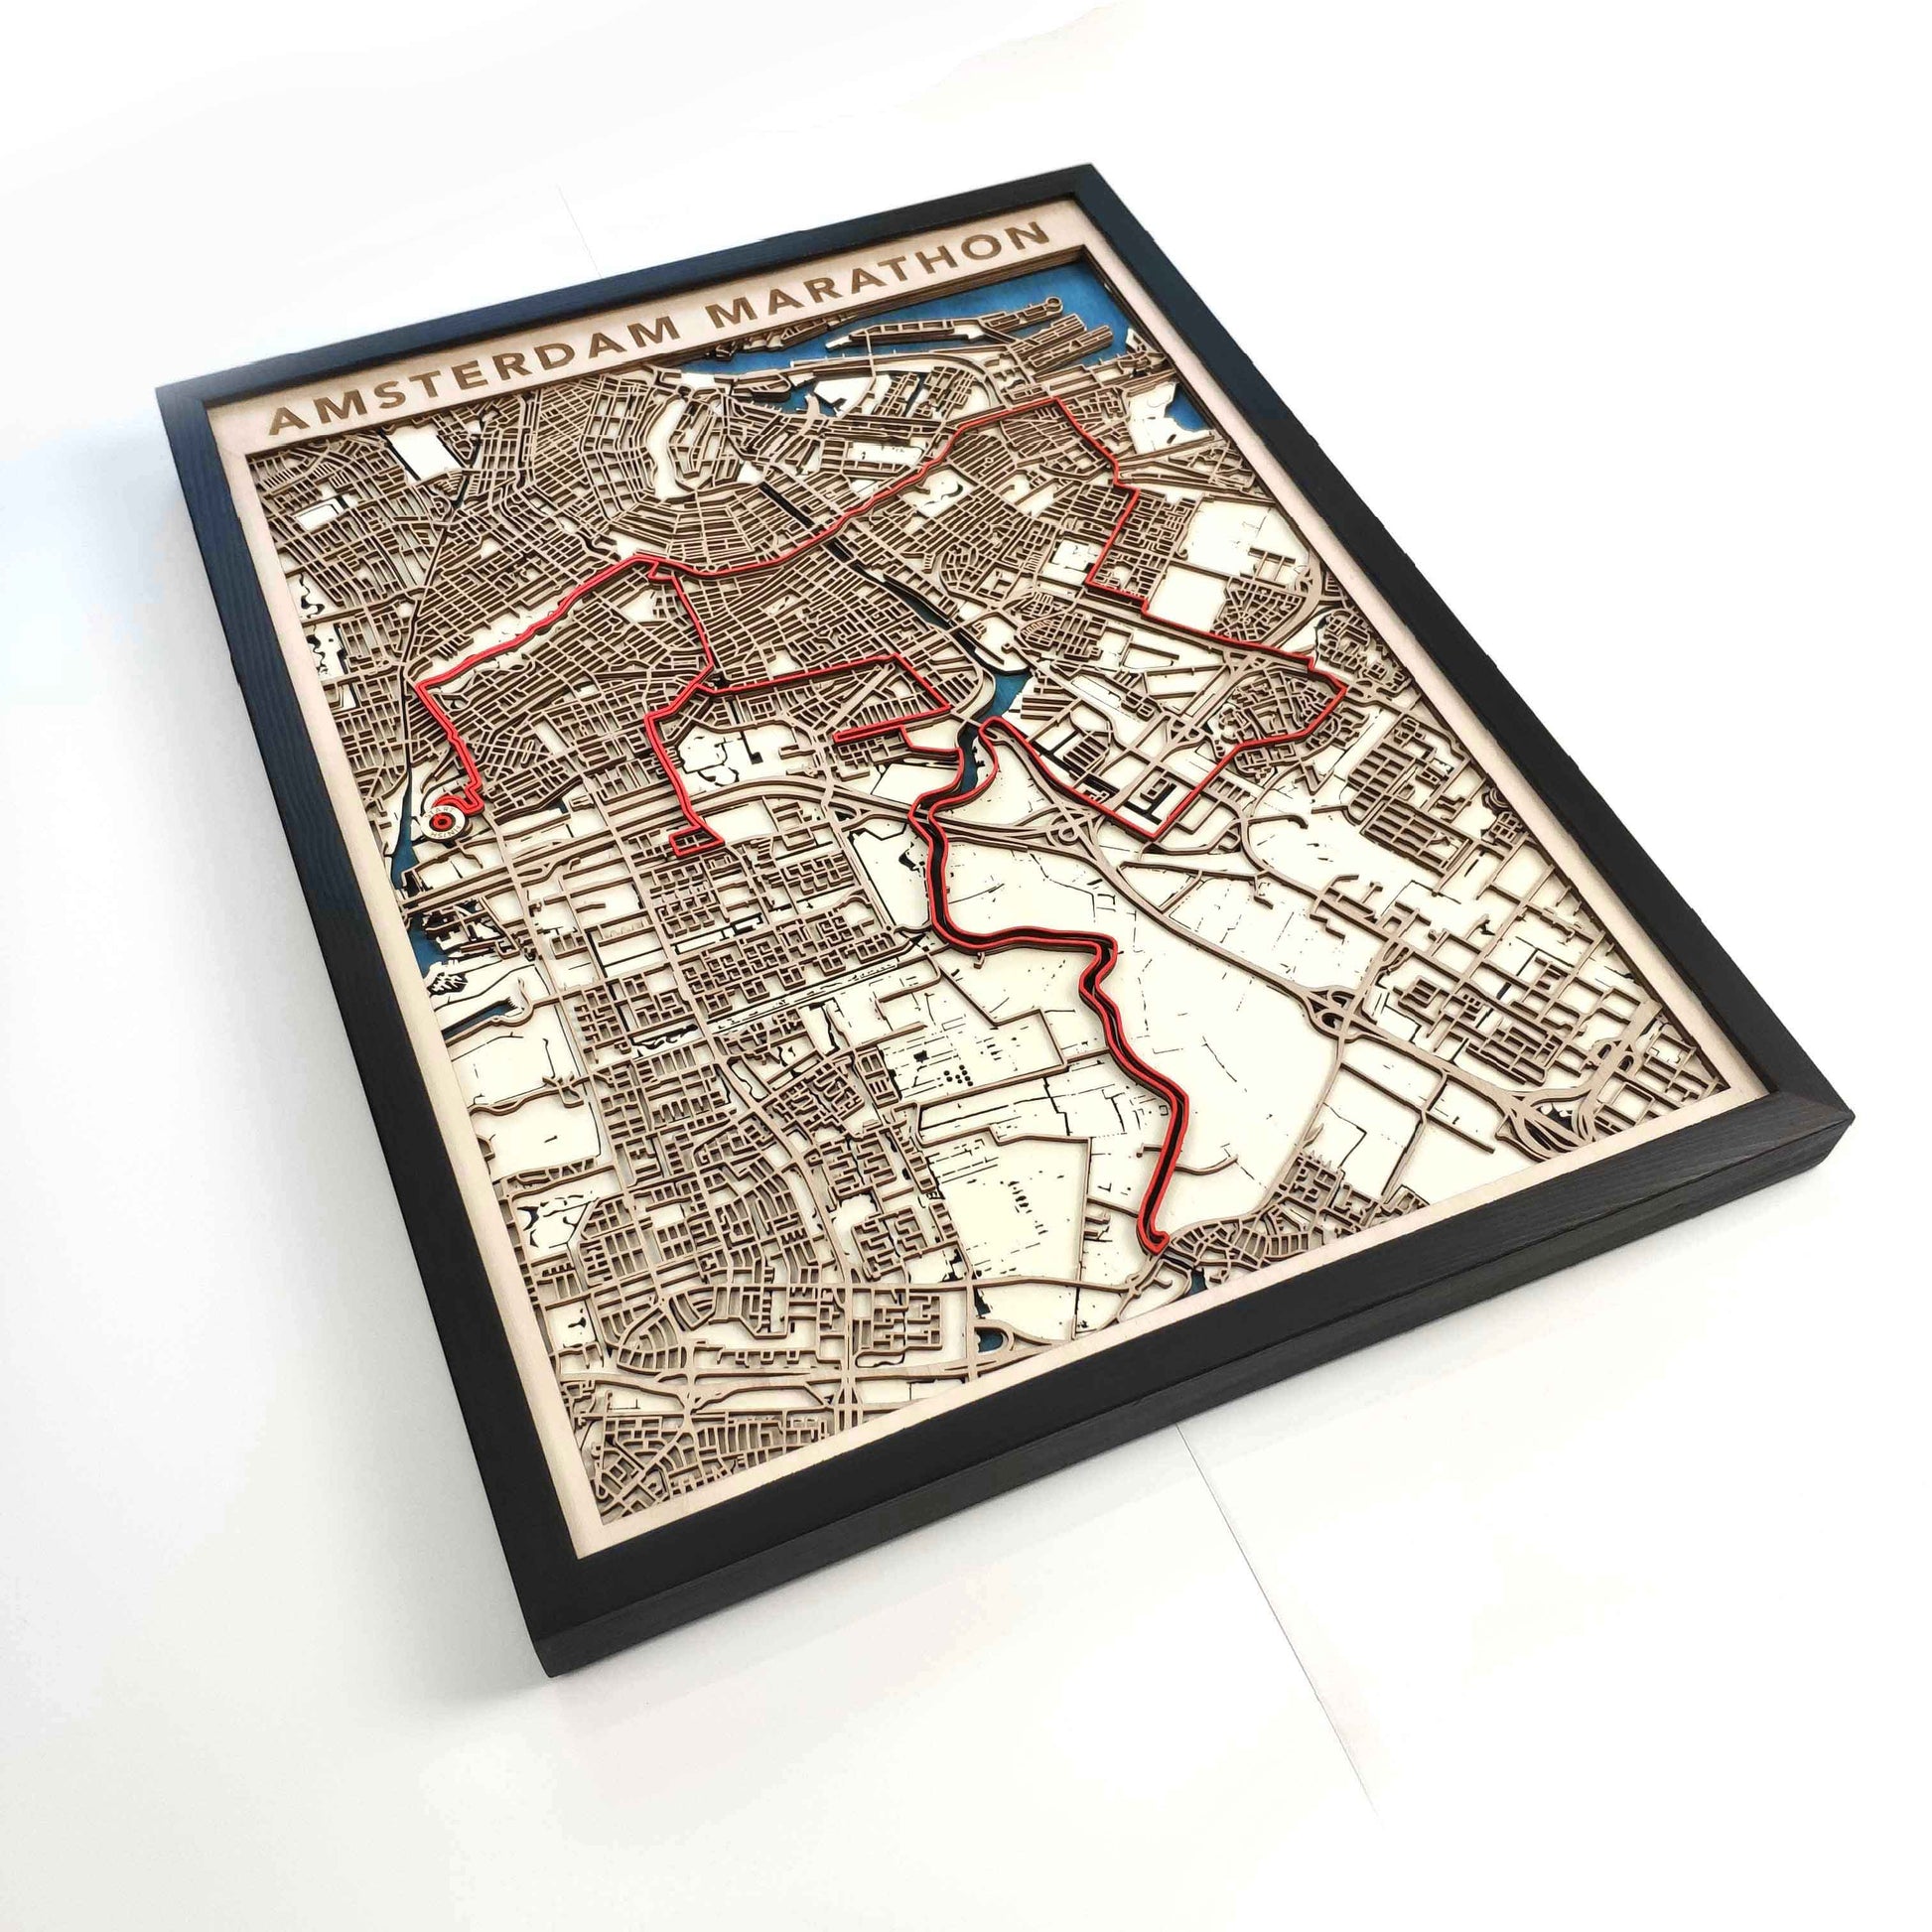 Amsterdam Marathon Wooden Map by CityWood - Custom Wood Map Art - Unique Laser Cut Engraved - Anniversary Gift